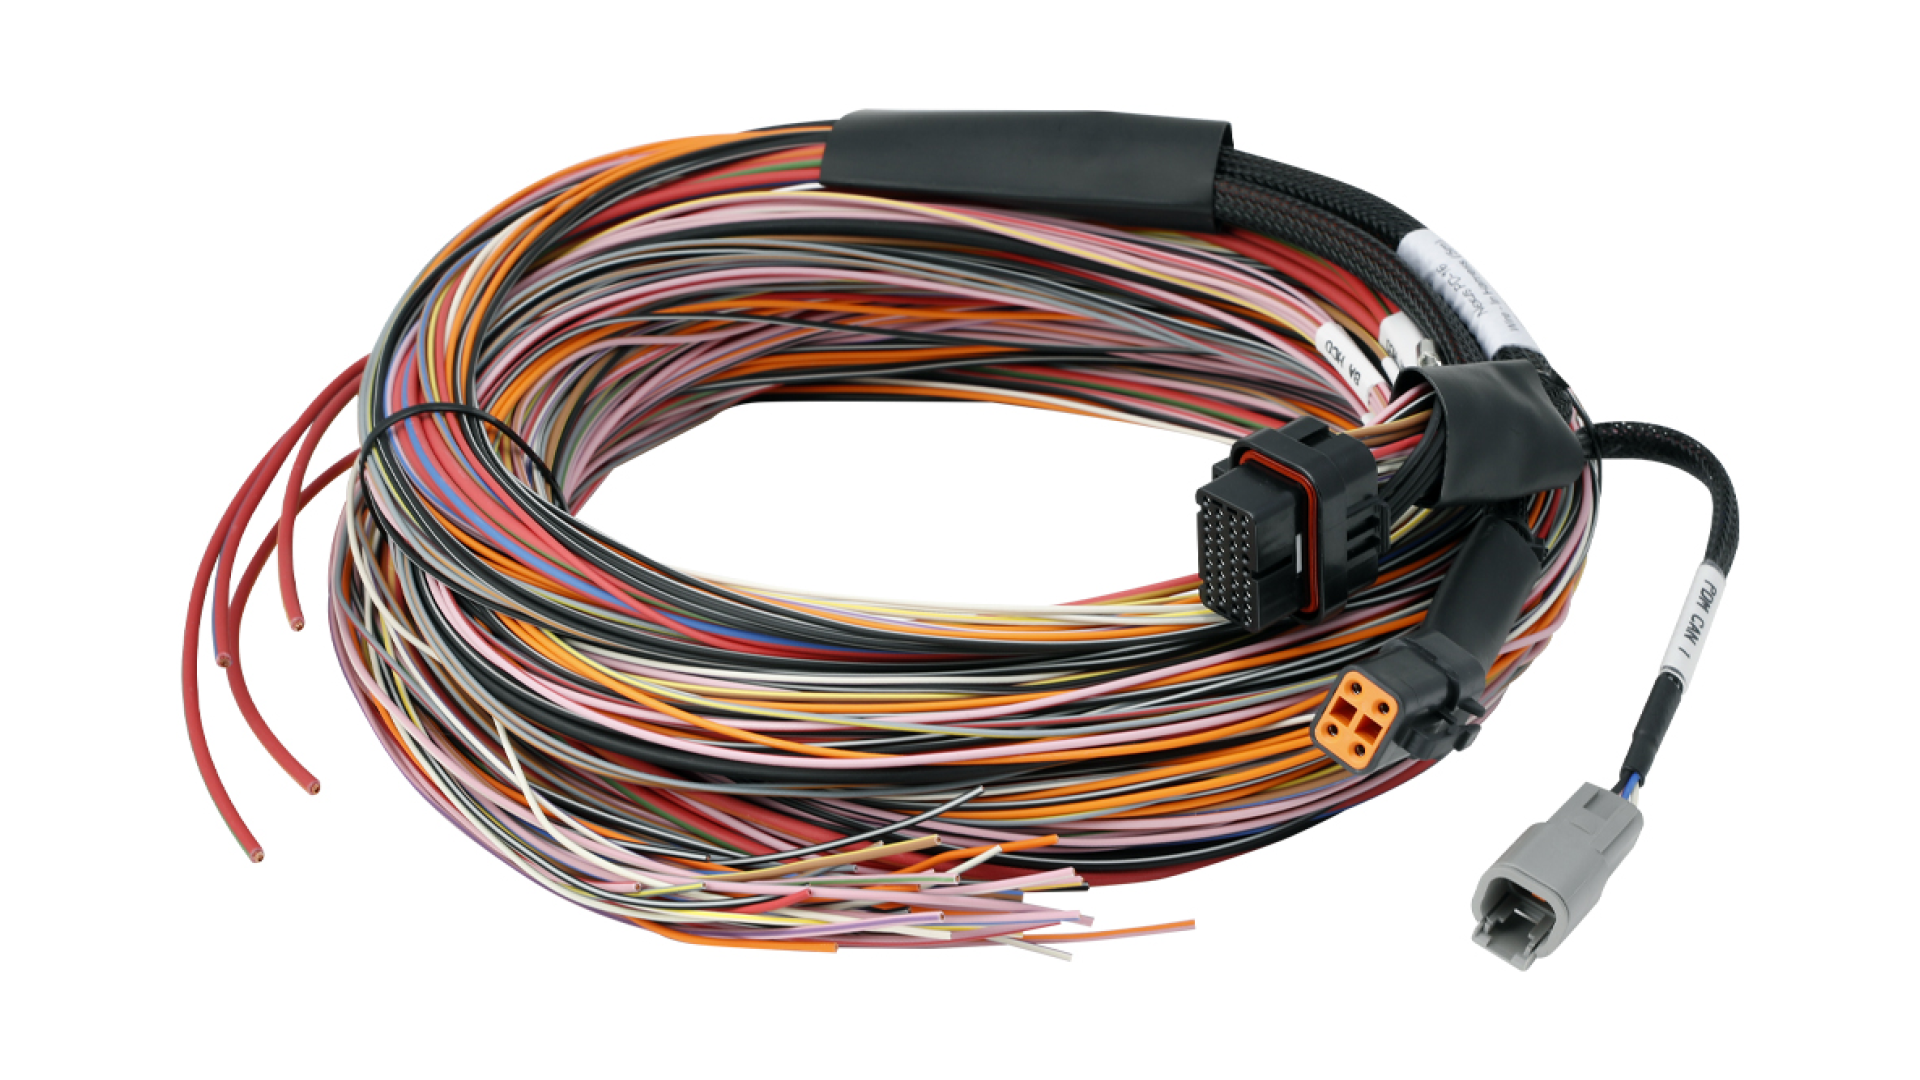 Haltech Controller cable with PD16 5M plugs